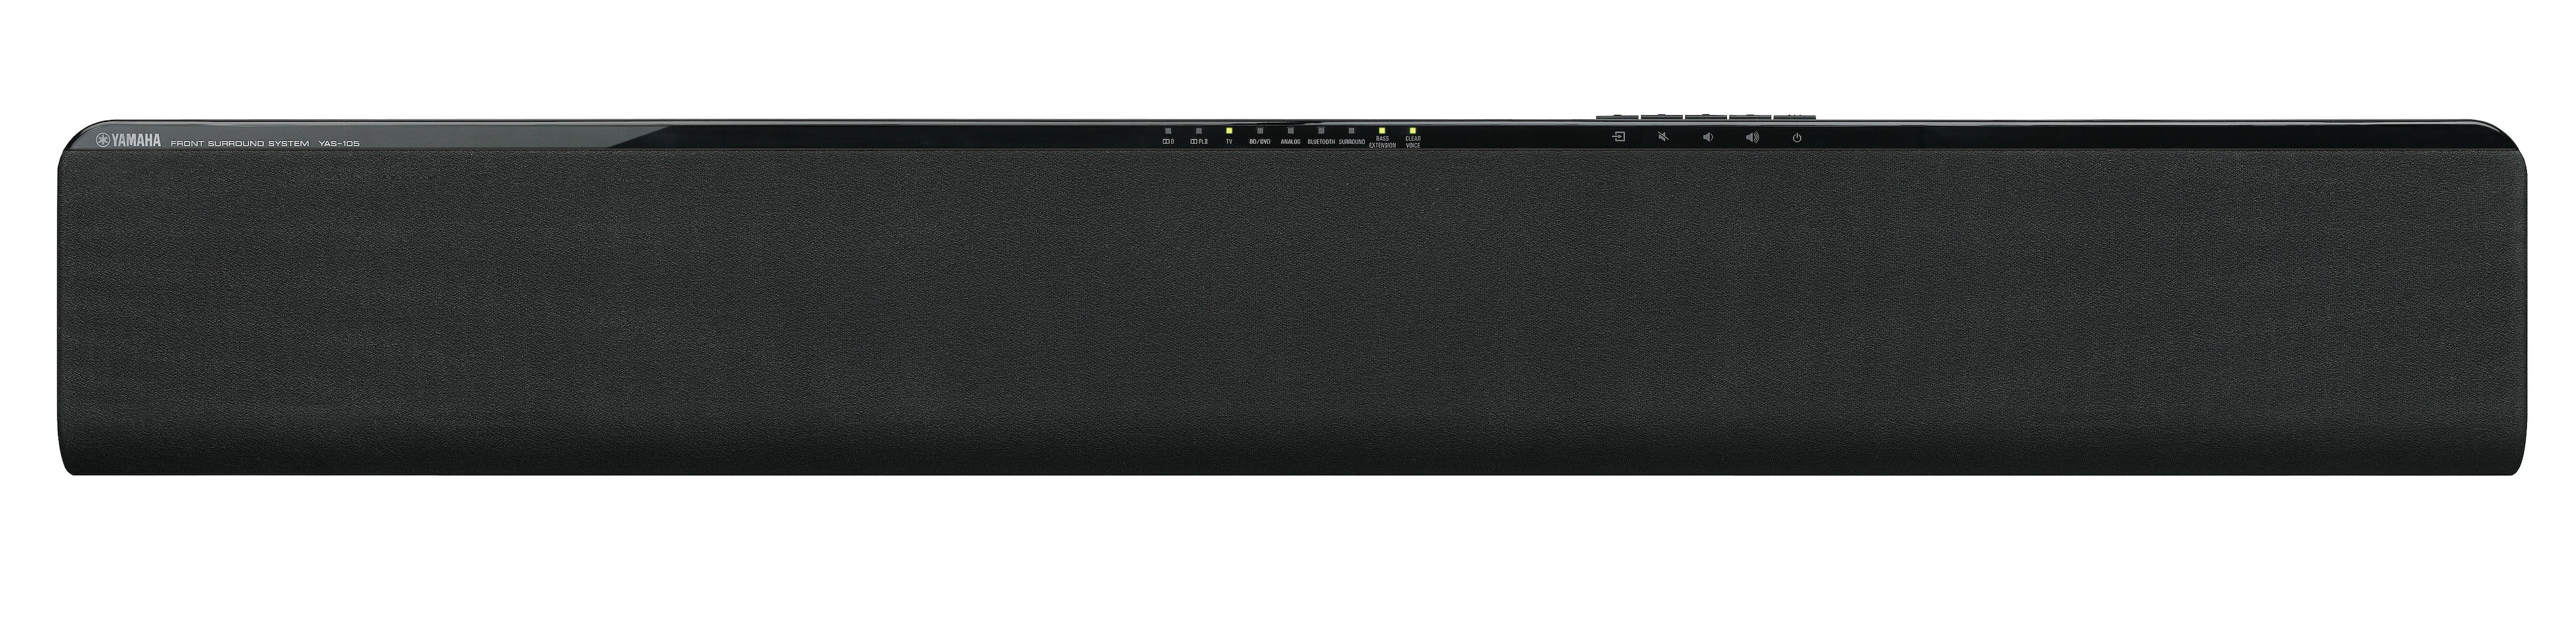 YAS-105 - Overview - Sound Bars - Audio & Visual - Products